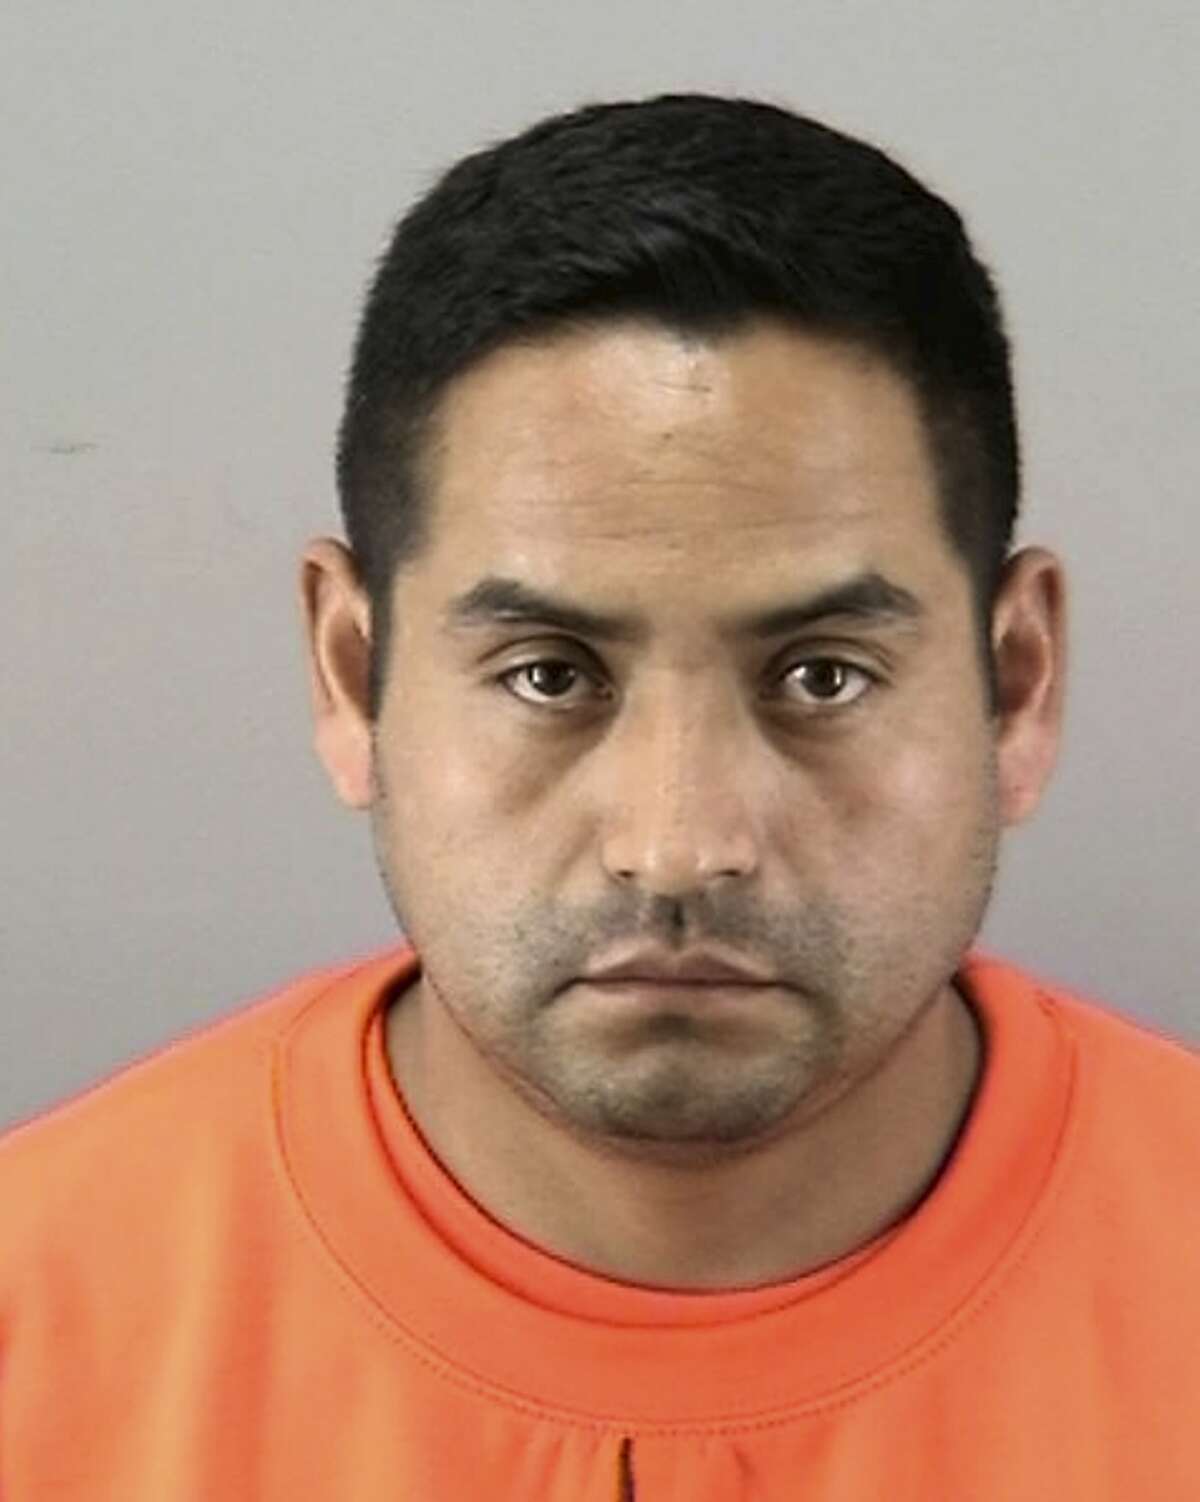 FILE - This file booking photo released by the San Francisco Police Department shows Orlando Vilchez Lazo. Federal immigration authorities say Lazo, a suspected serial rapist charged with posing as a Northern California ride-hailing driver to prey on his victims was living in the United States illegally. The U.S. Immigration and Customs Enforcement agency said Tuesday, July 17, 2018, it plans to deport Orlando Vilchez Lazo to his native Peru if he is released from custody. (San Francisco Police Department via AP, File)